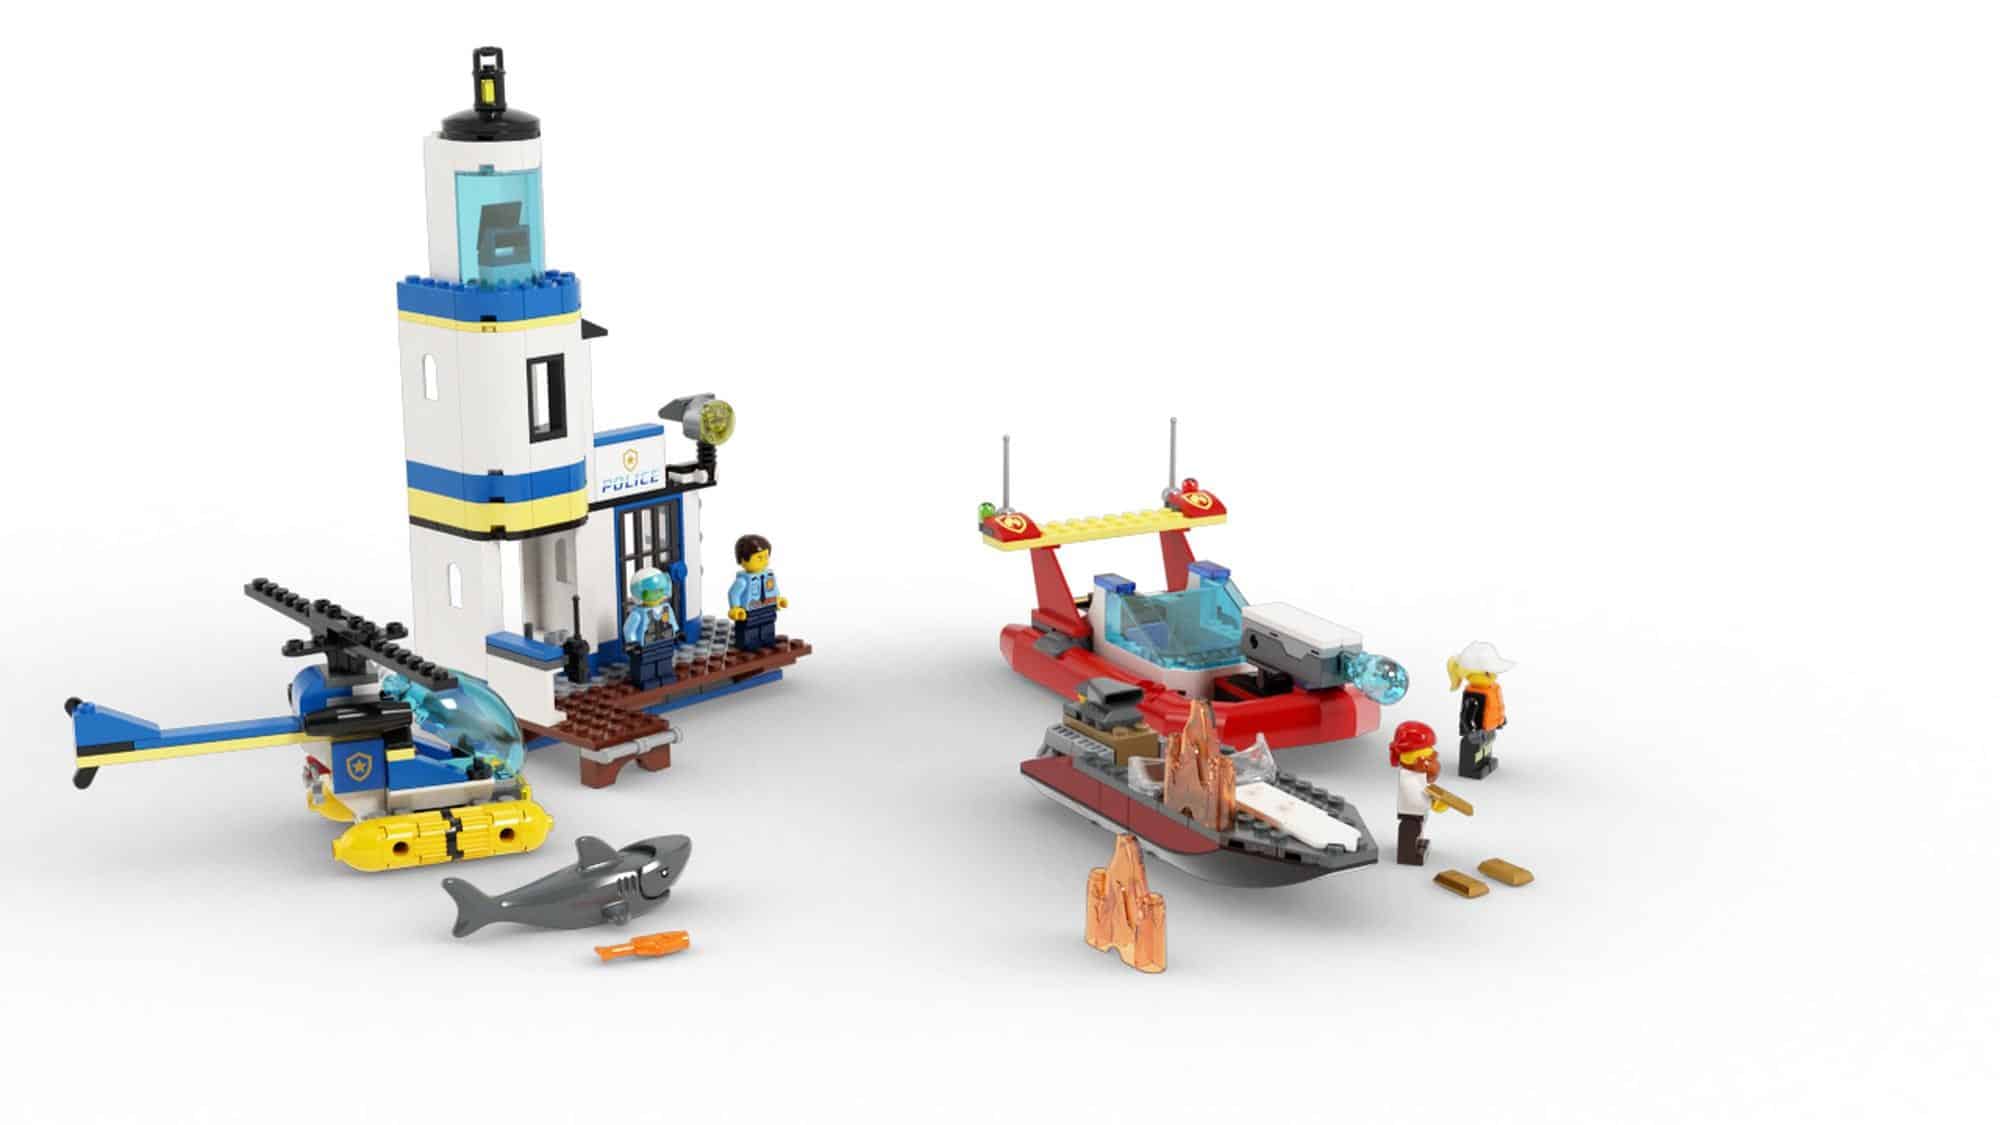 Seaside Police and Fire mission lego